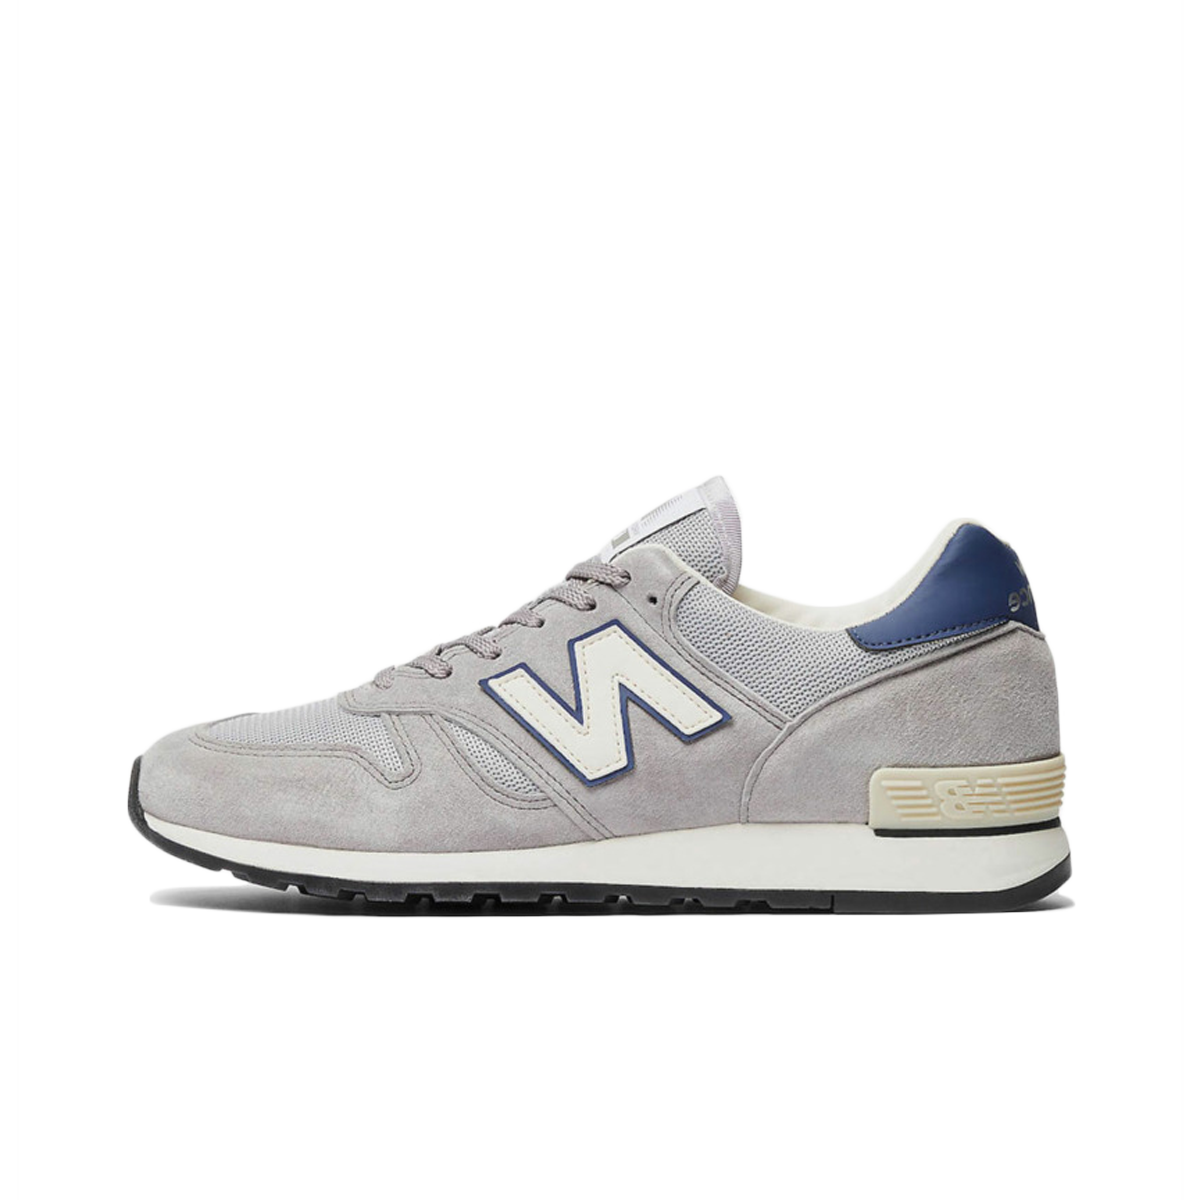 New Balance M670 UKF Made in UK 'Catalogue Pack'